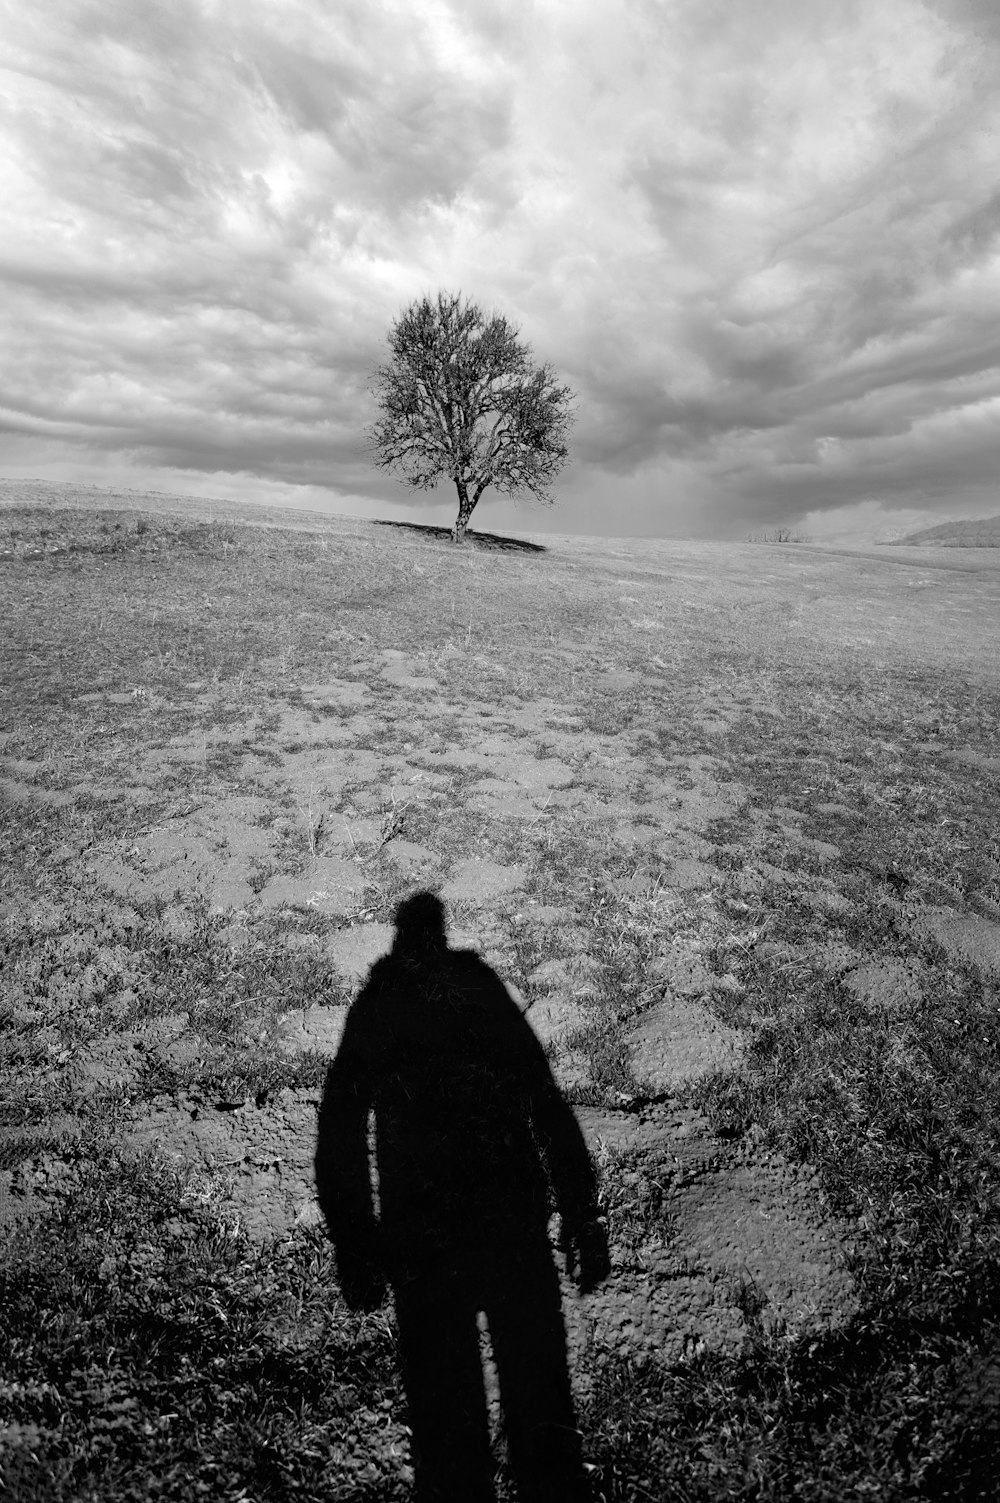 a person standing in a field with a tree in the background